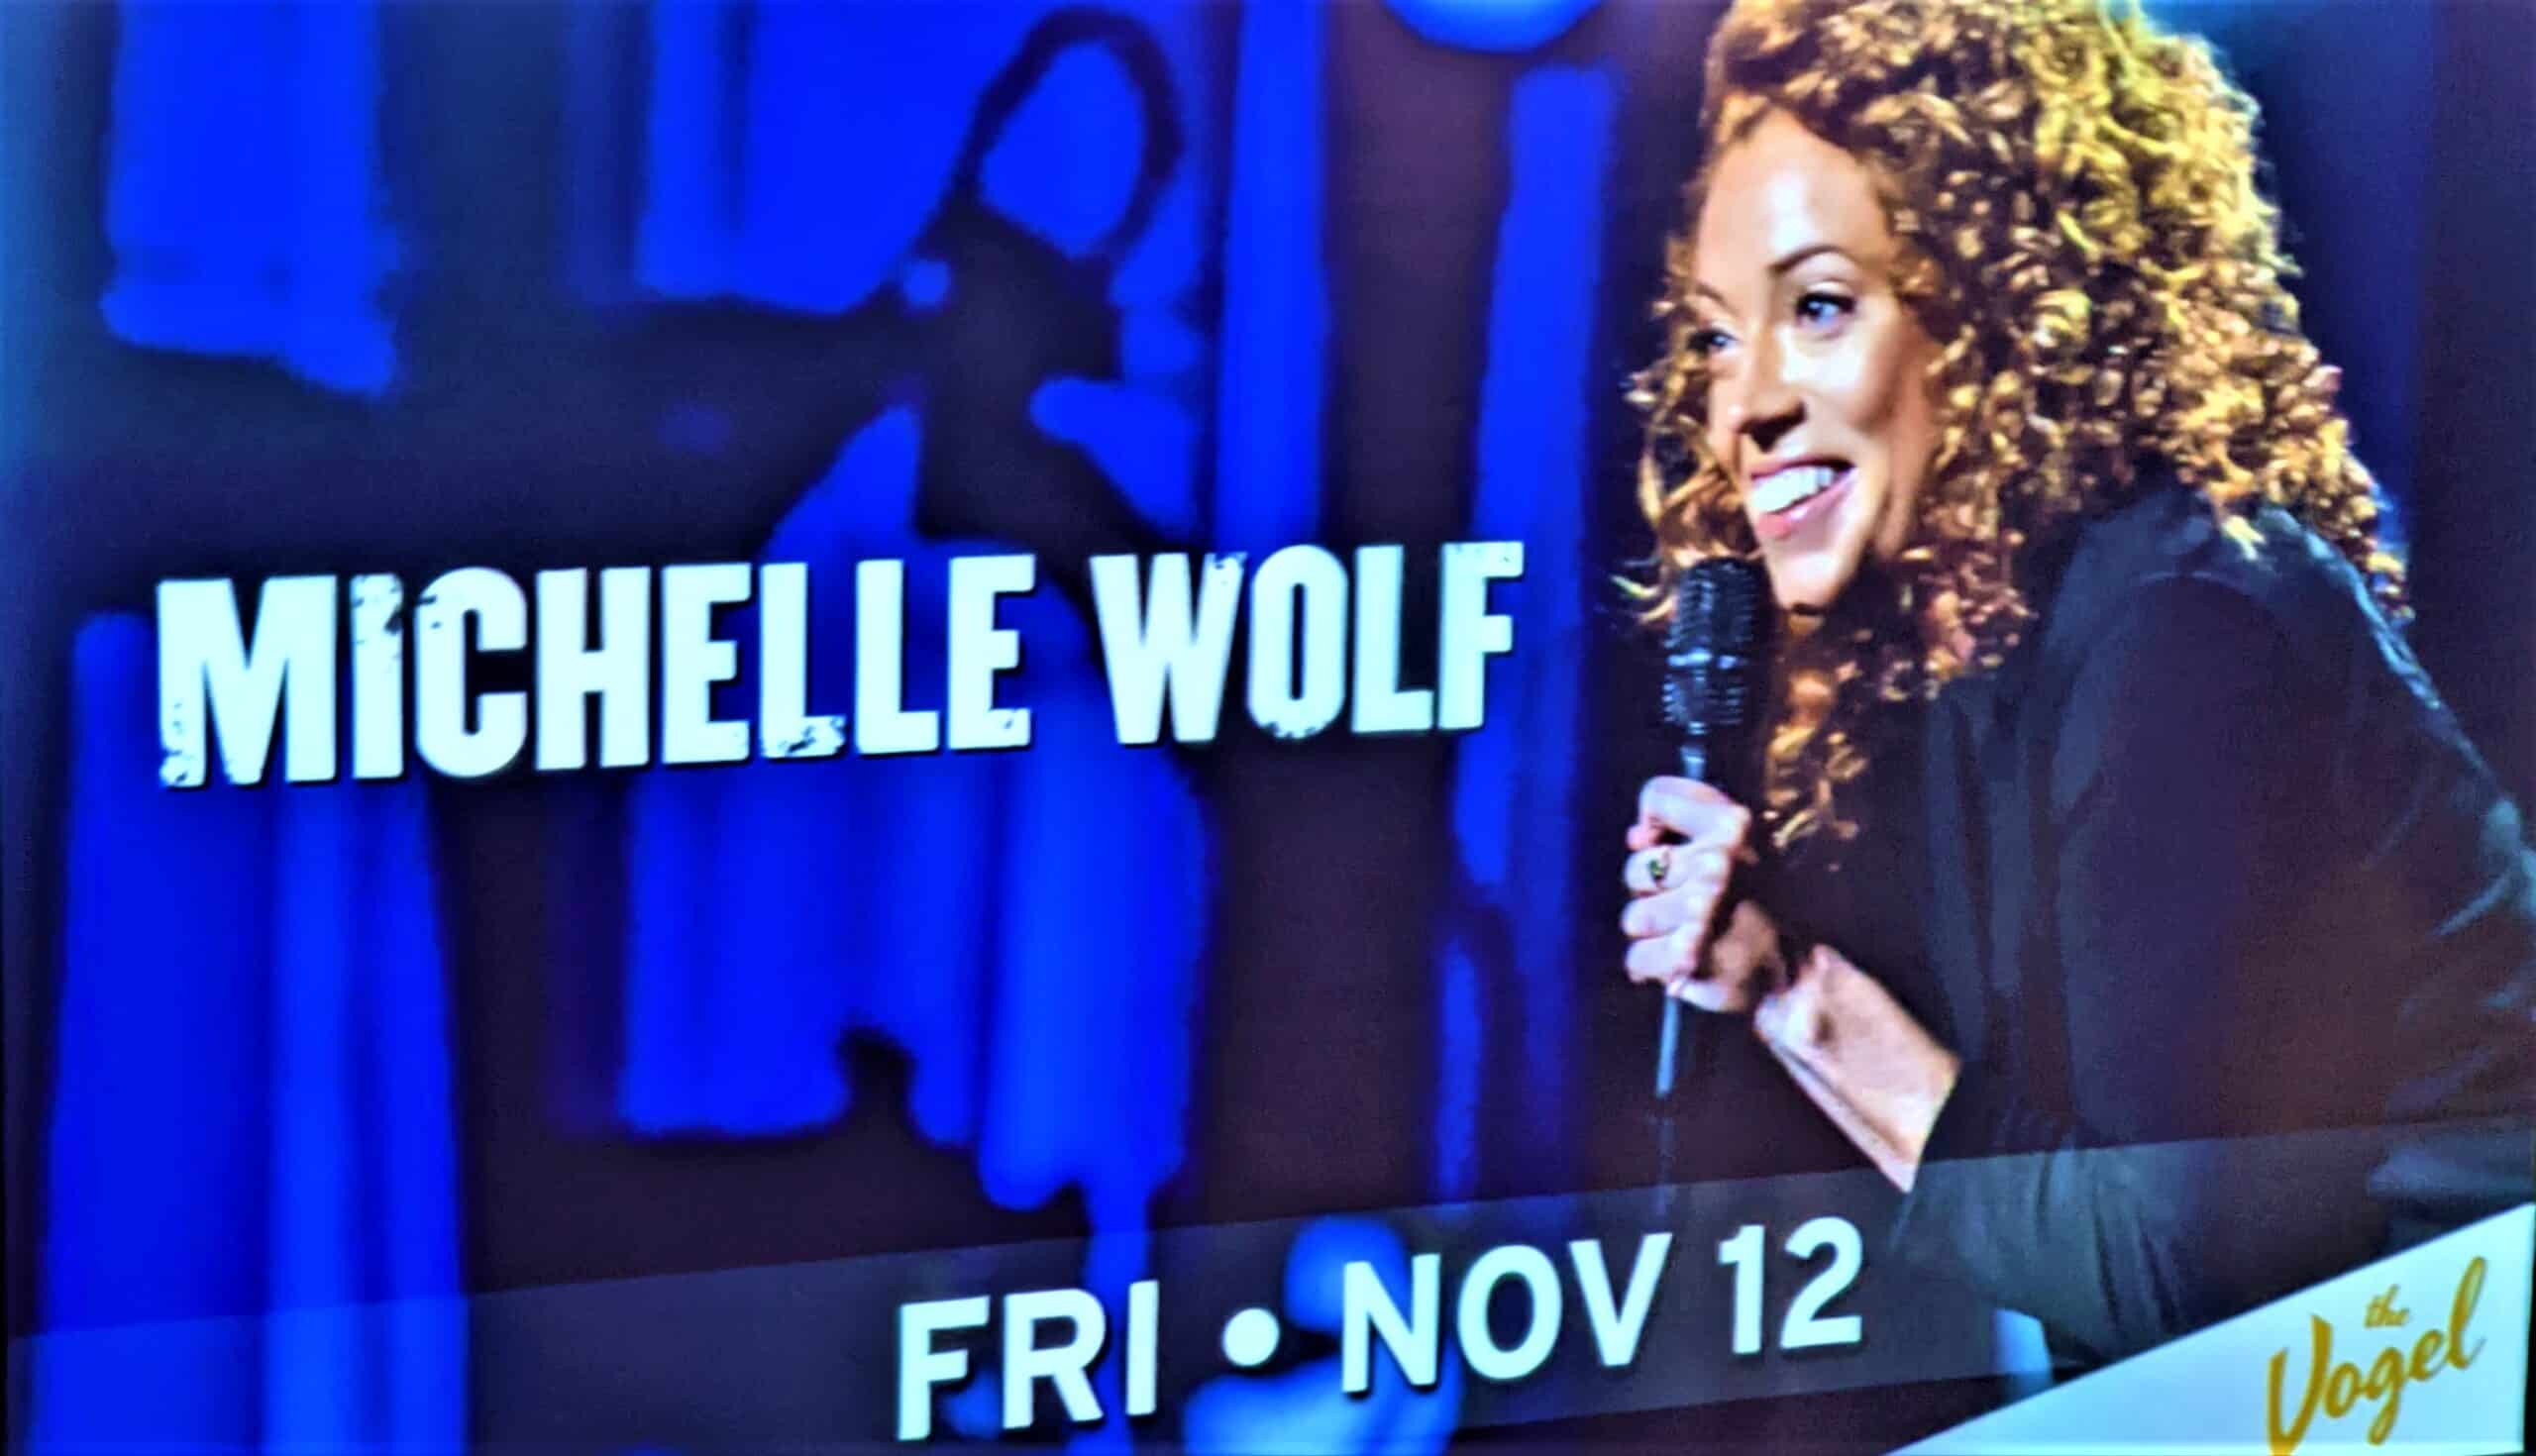 Michelle Wolf advertisement for her appearance at The Vogel on November 12th